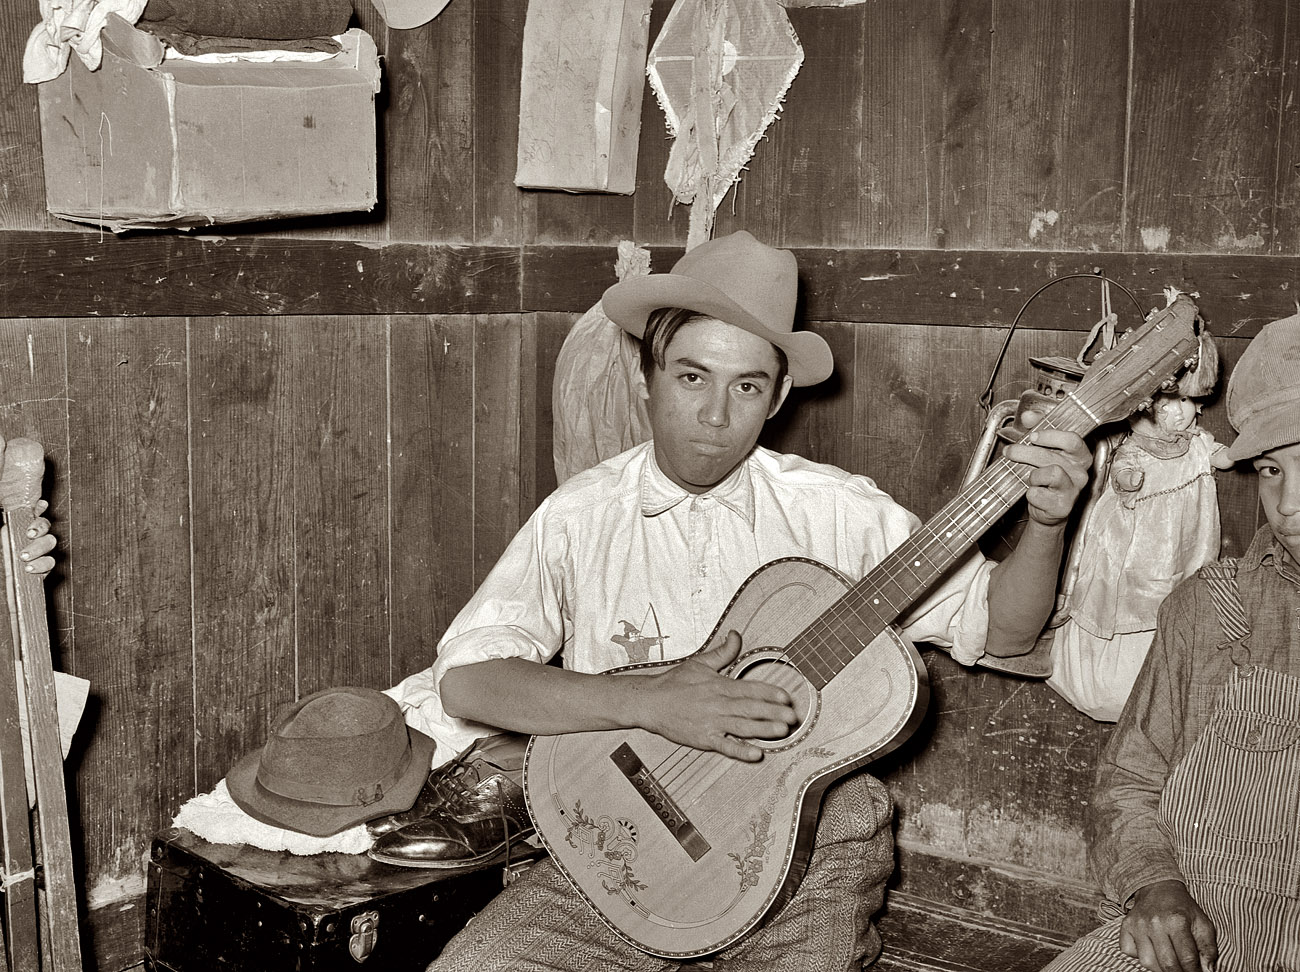 February 1939. Robstown, Texas. Mexican boy playing guitar in room of corral. View full size. Medium-format safety negative by Russell Lee for the FSA.